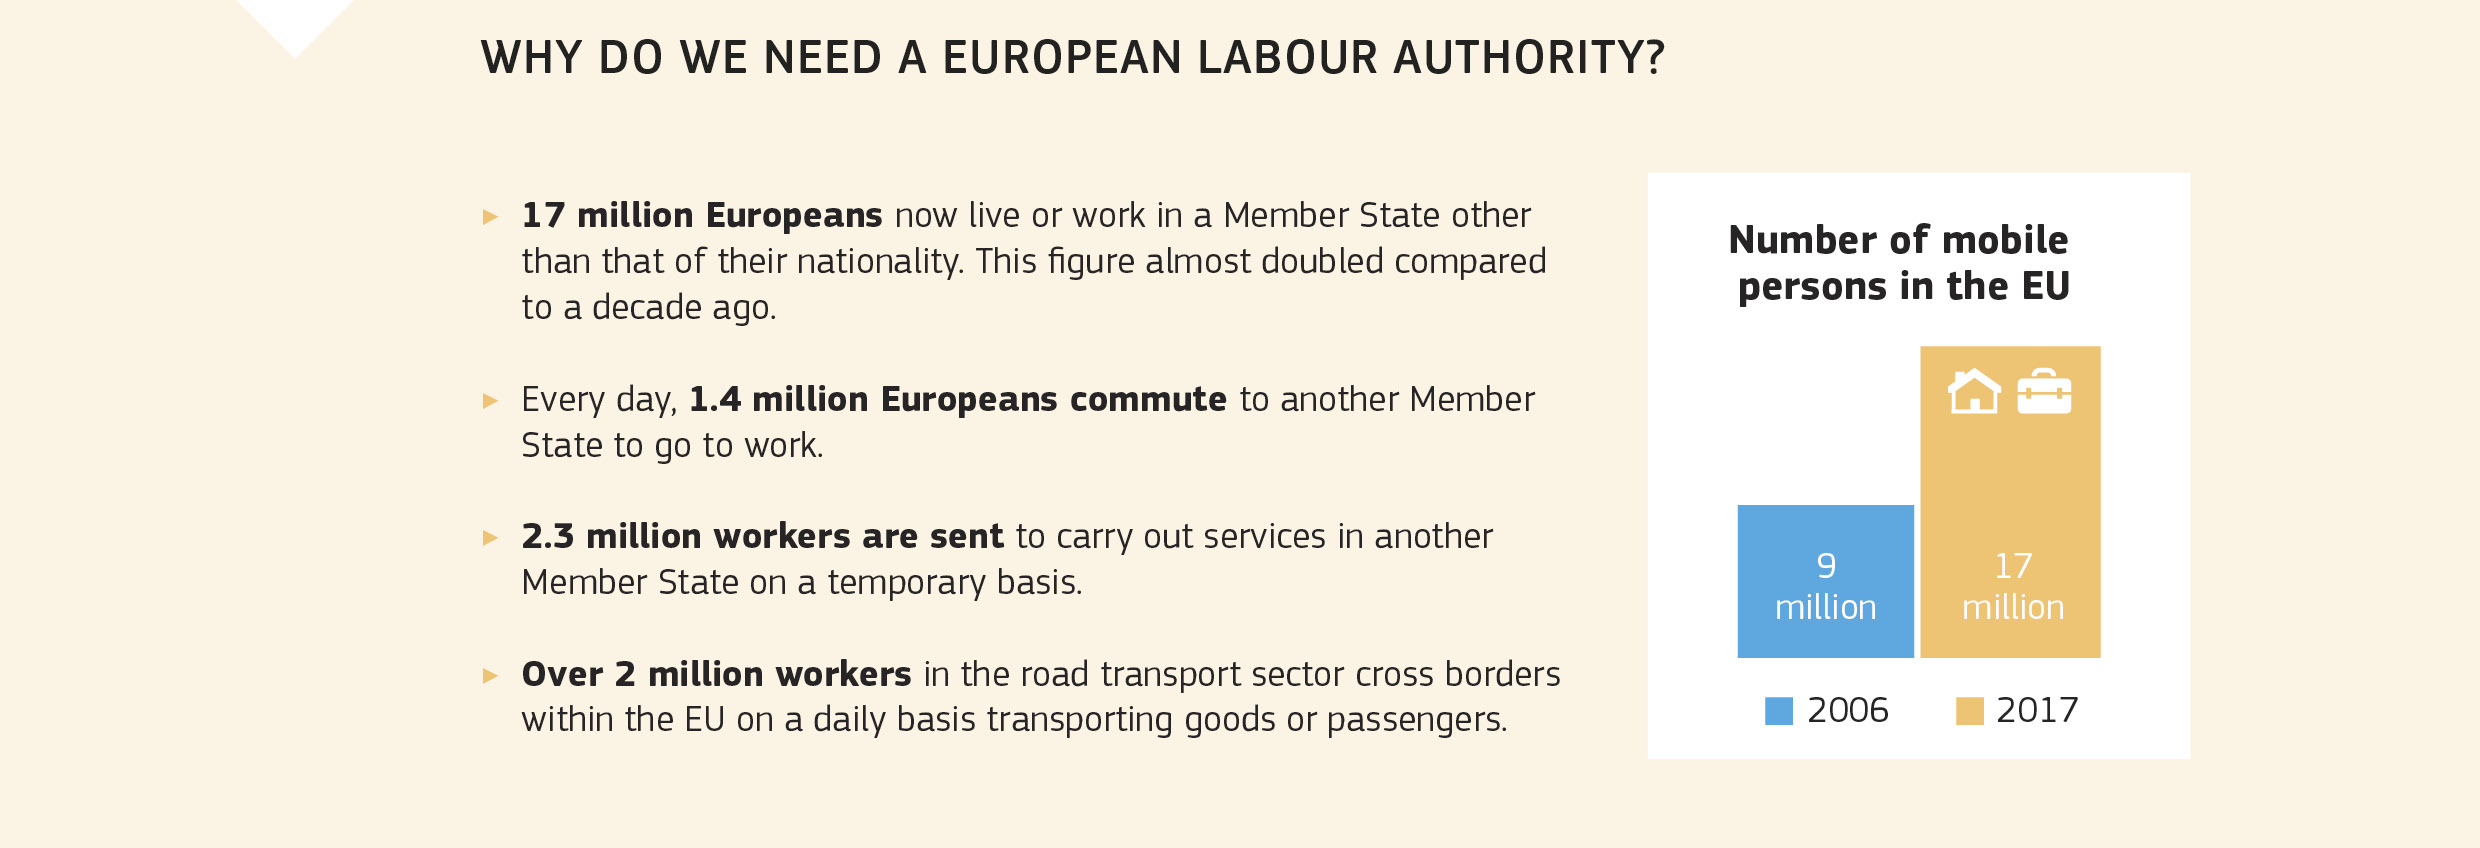 WHY DO WE NEED A EUROPEAN LABOUR AUTHORITY?